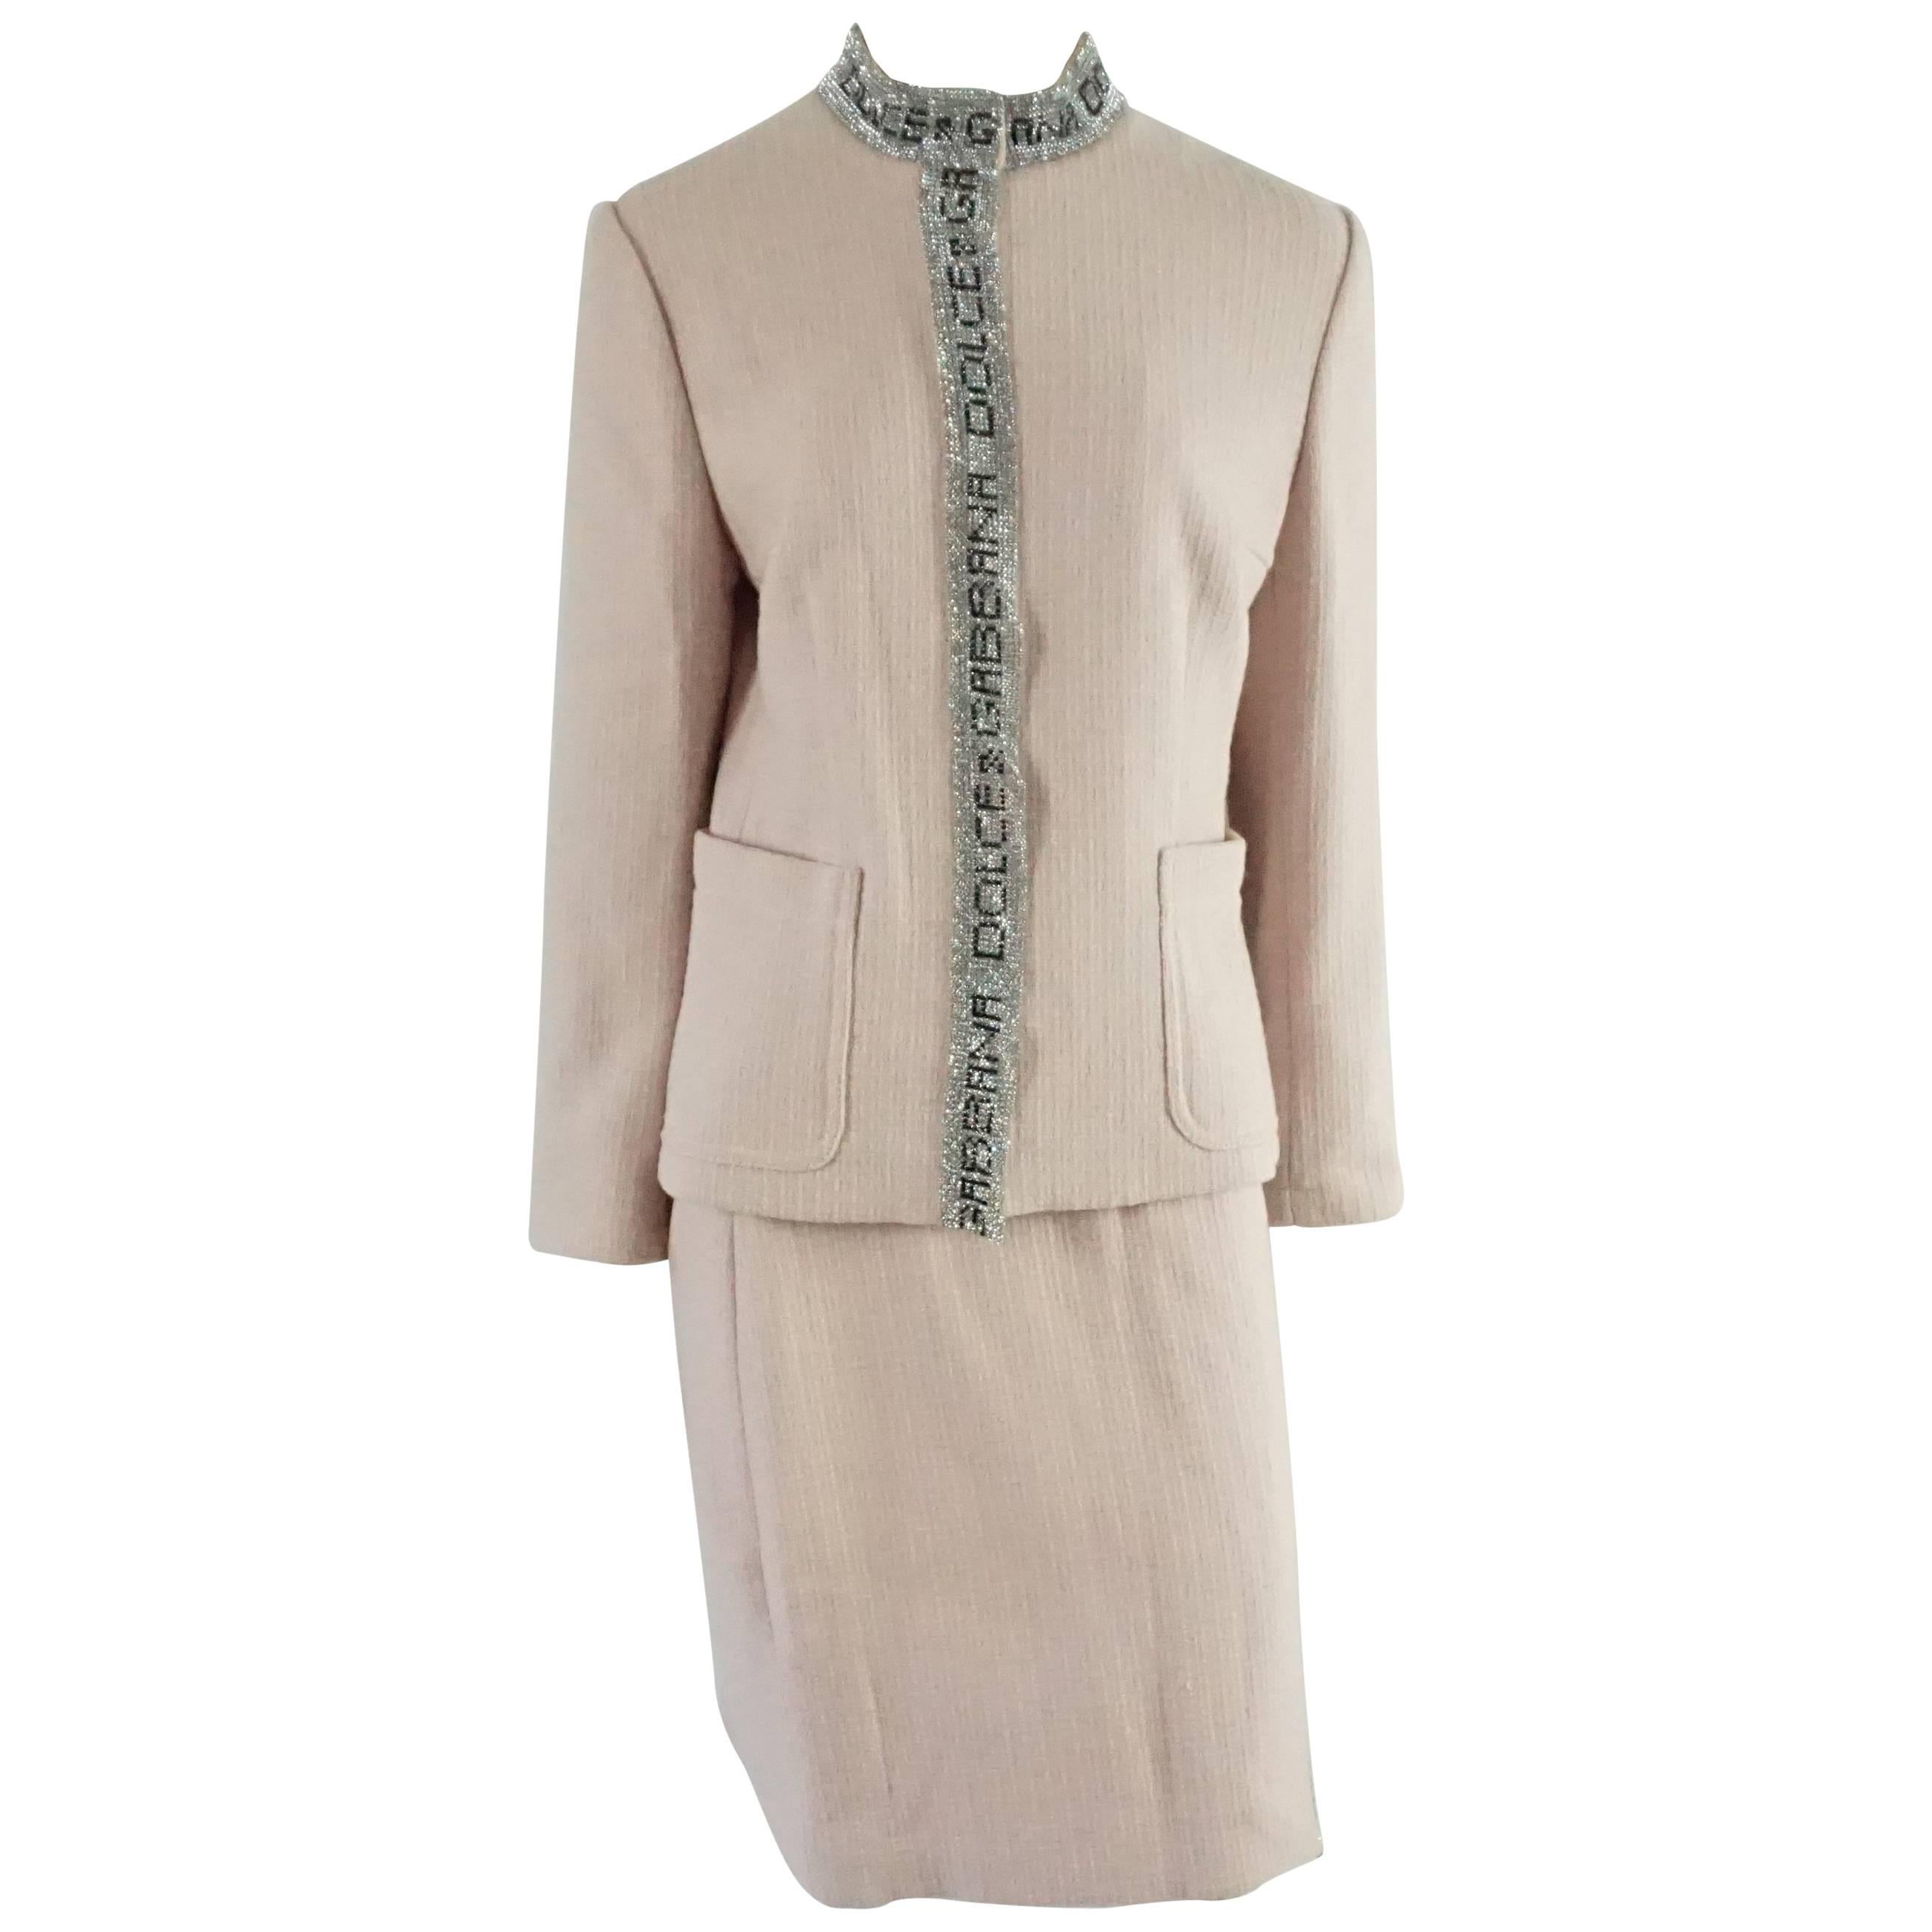 Dolce & Gabbana Pink Tweed Skirt Suit with a Rhinestone Logo Trim - Size 44 For Sale